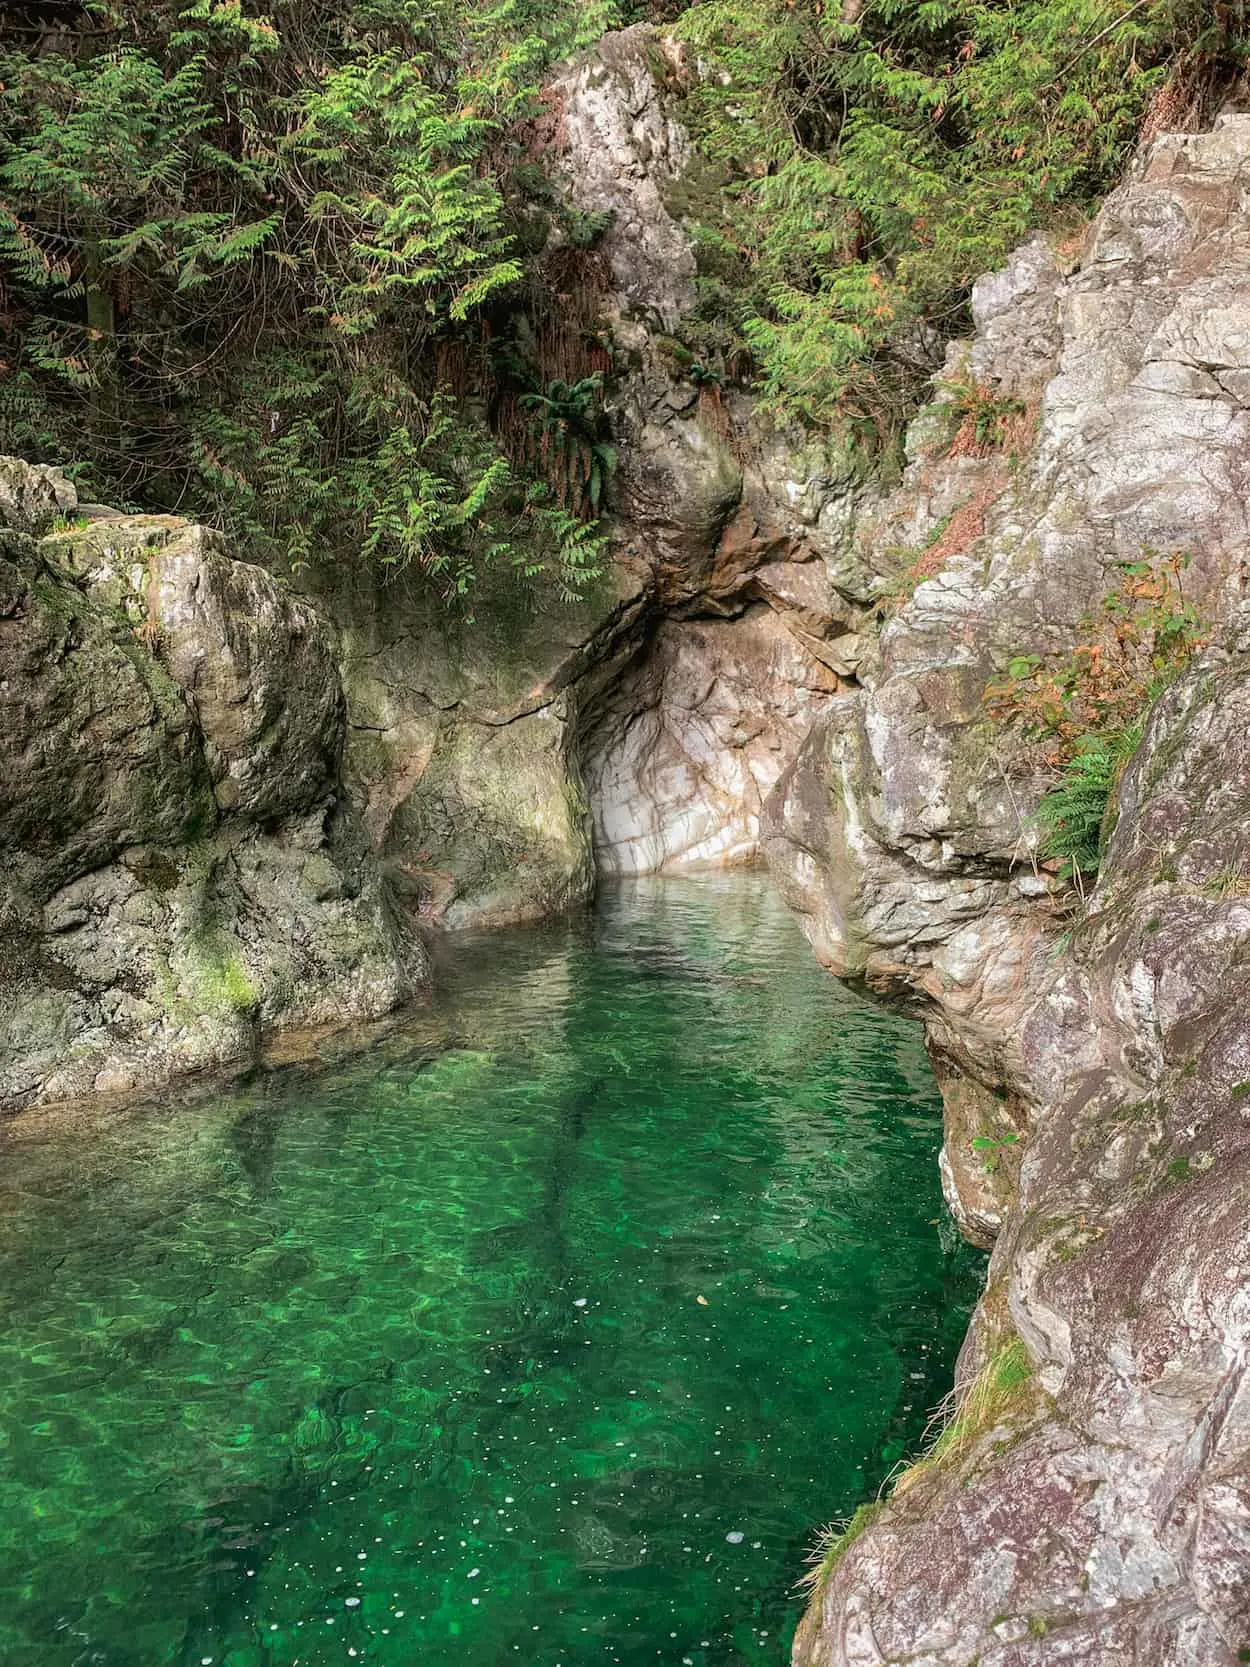 The gorge at Lynn Canyon in North Vancouver, British Columbia